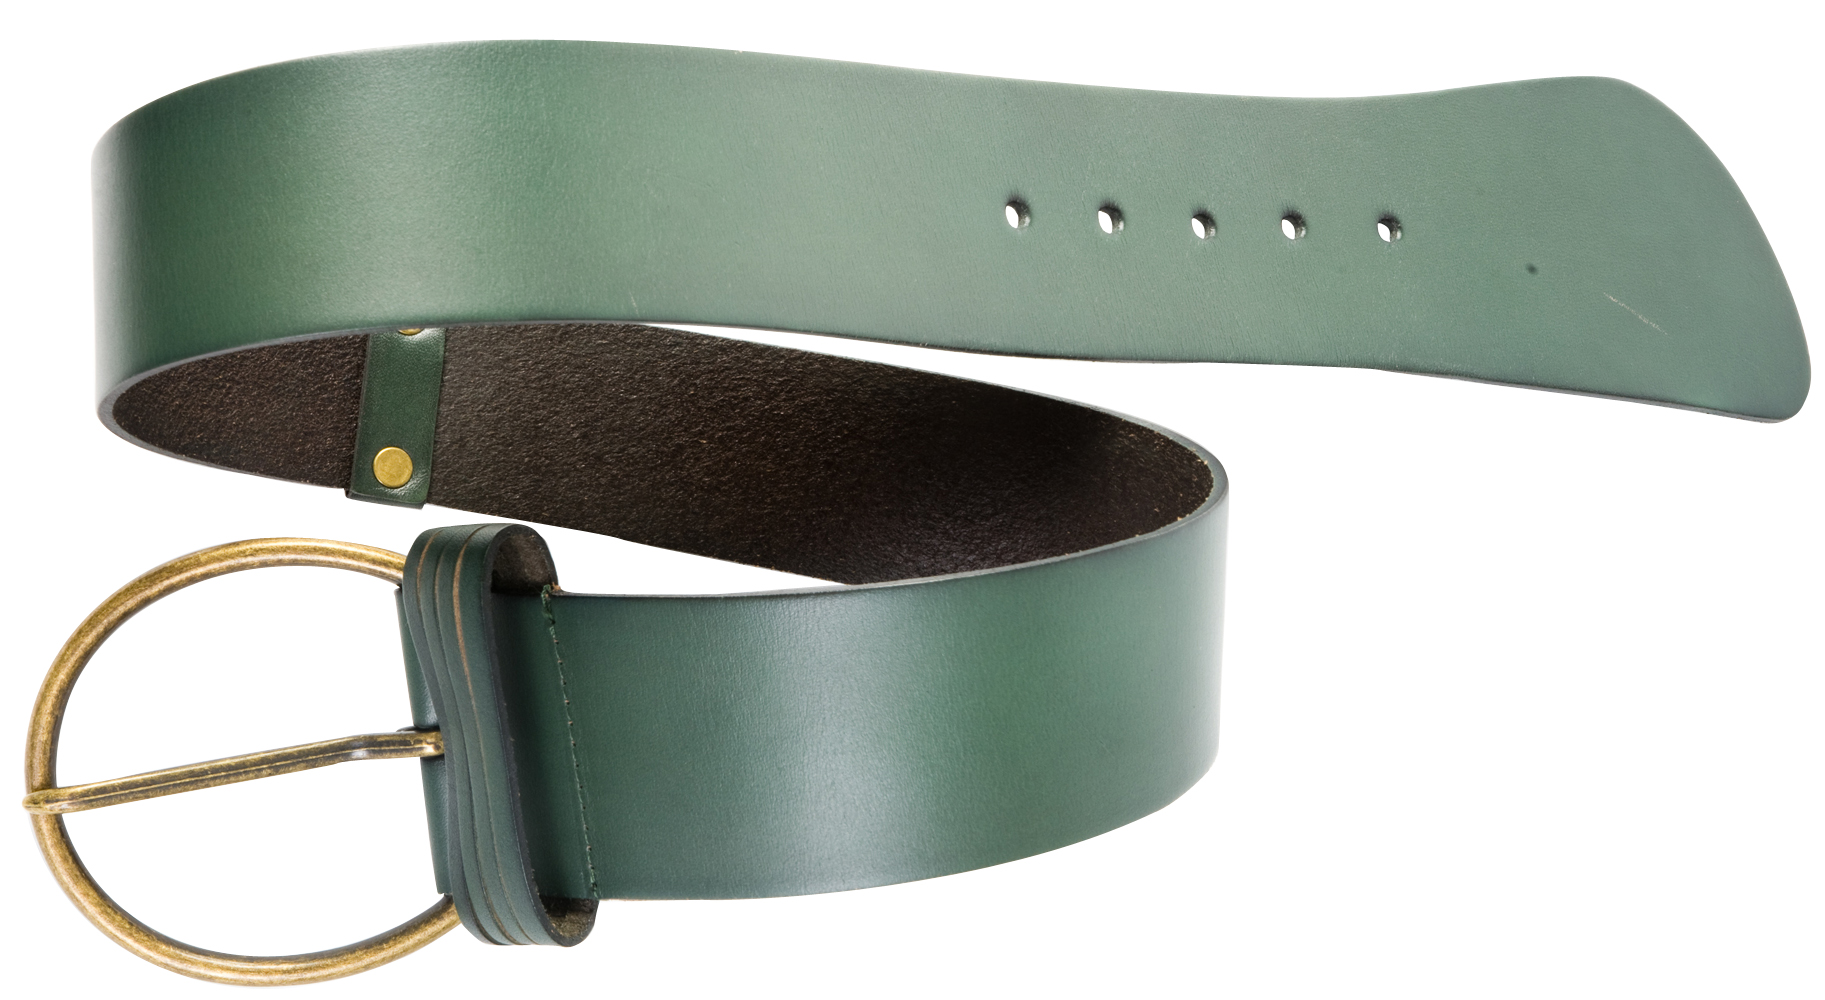 Wide waist belt in army green with a brass finish buckle, $56 at Teal